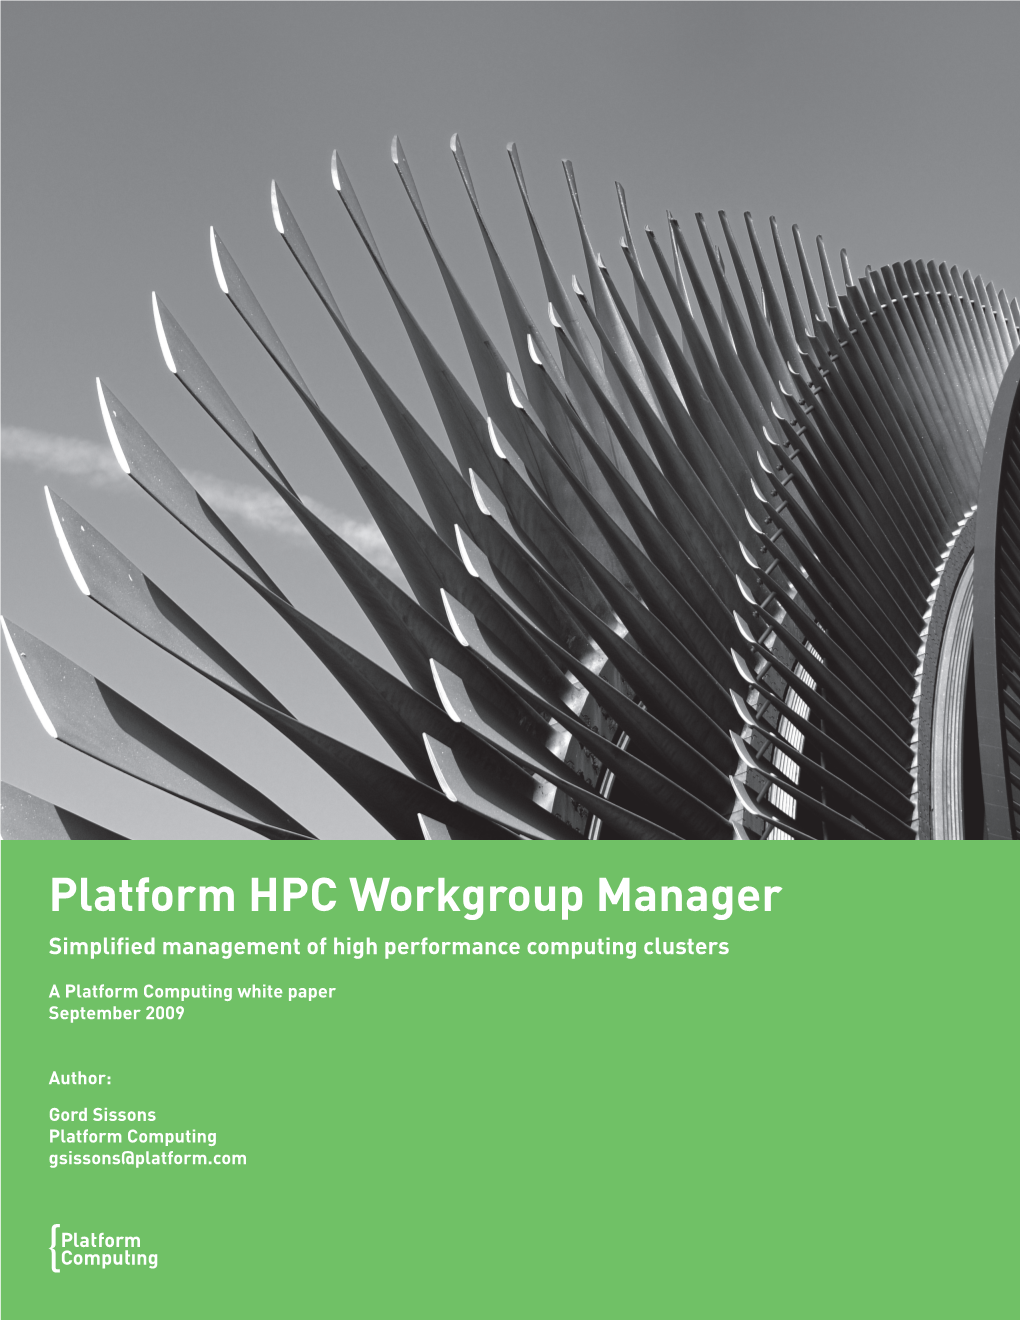 Platform HPC Workgroup Manager Simplified Management of High Performance Computing Clusters